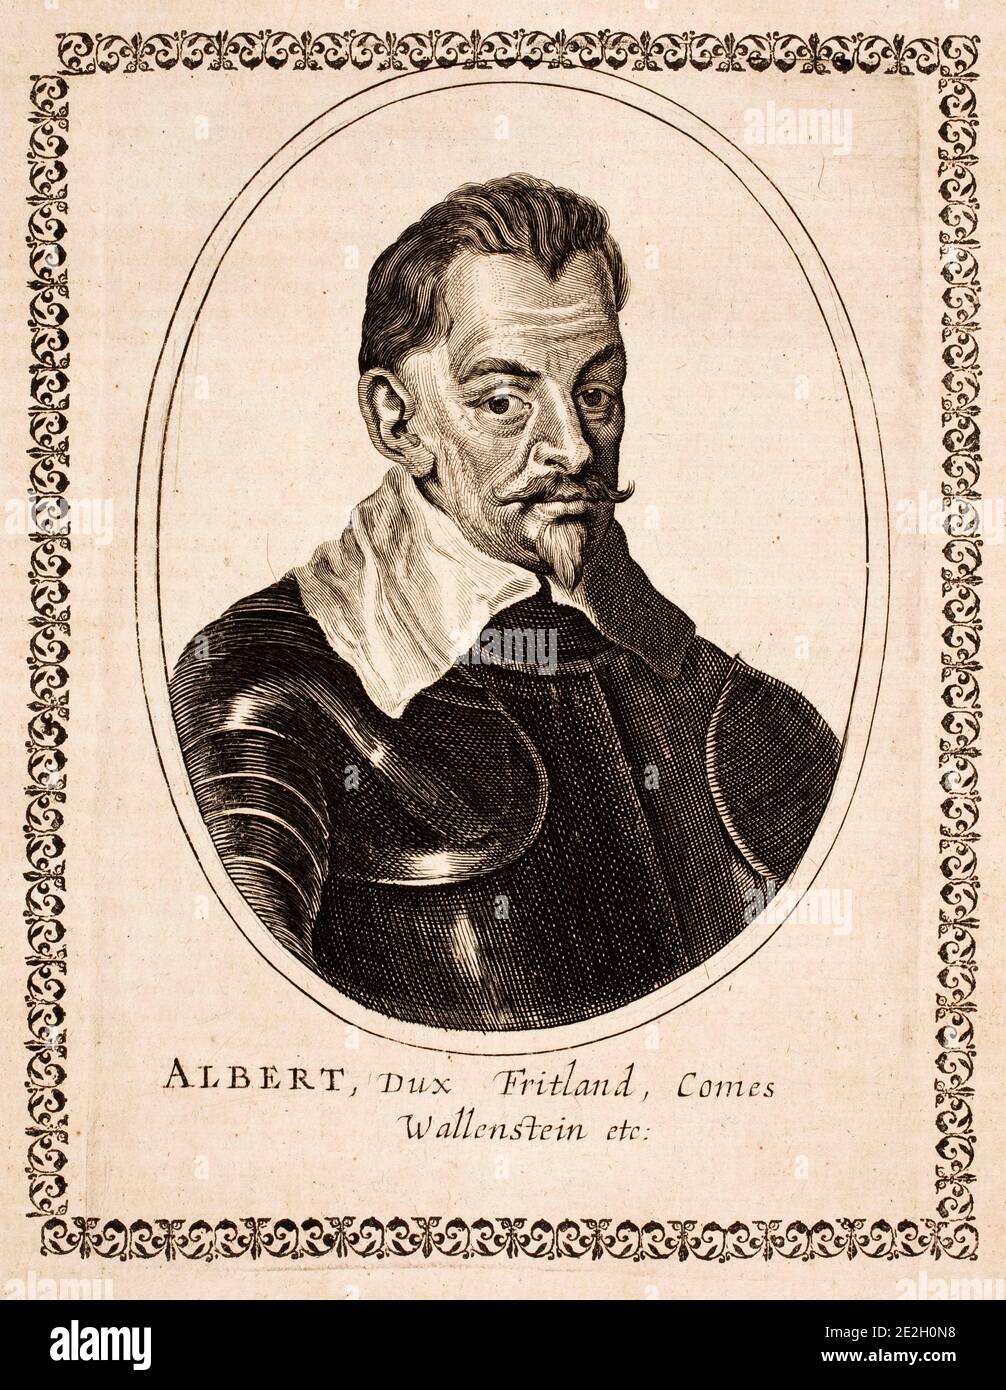 Portrait of Albrecht von Wallenstein (1583-1634), a Bohemian military leader and statesman who fought on the Catholic side during the Thirty Years' Wa Stock Photo